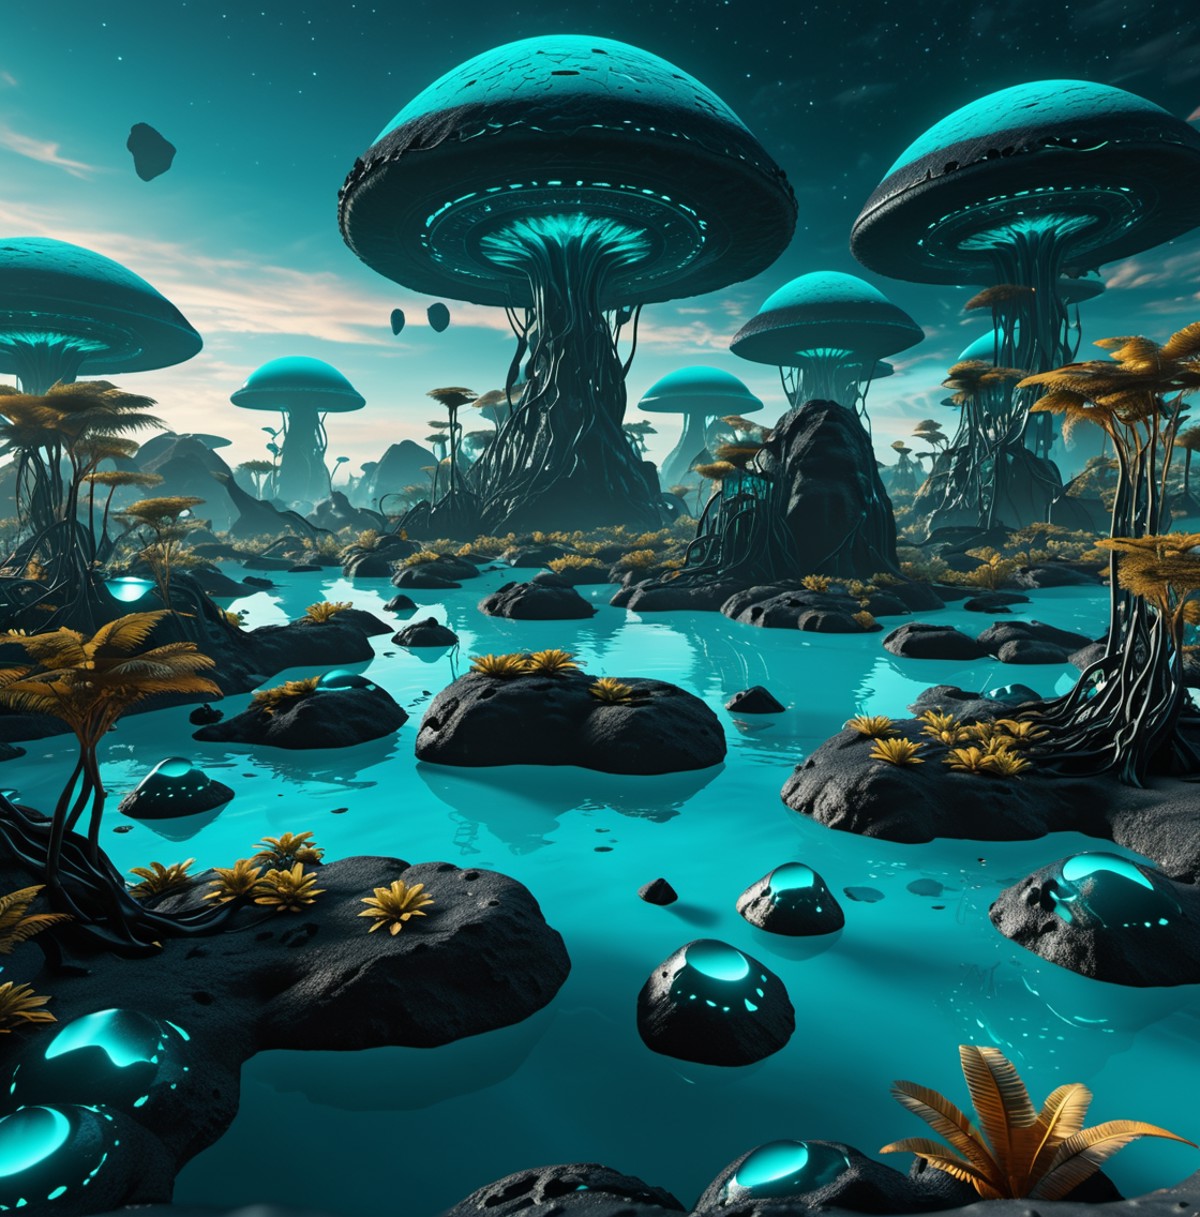 Extremely detailed alien landscape, floating islands, clouds, vines, teal and black jungle, glowing stones, teal and black...